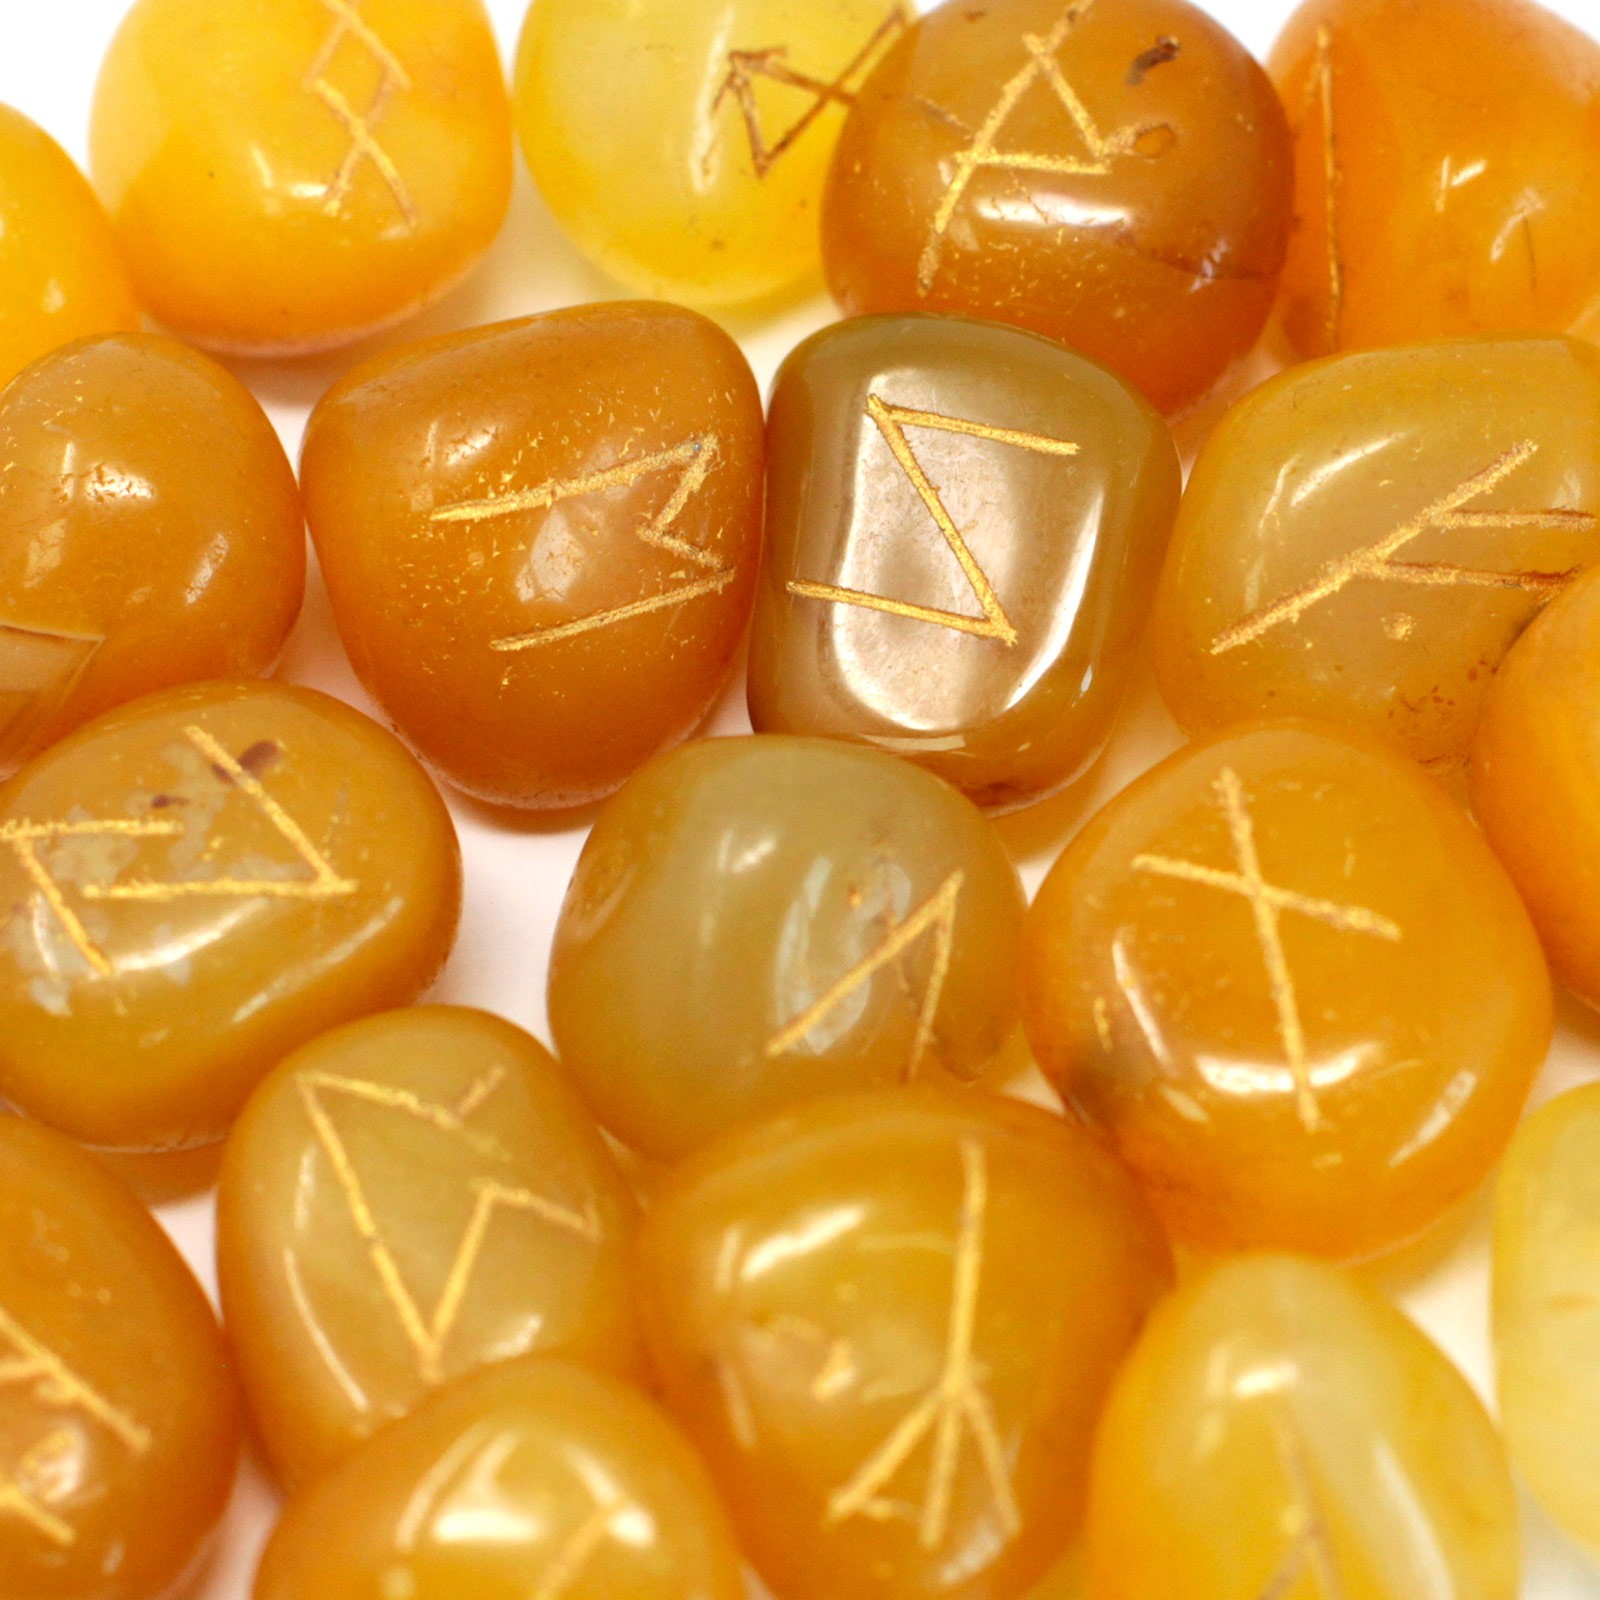 Runes Stone Set in Pouch- Yellow Onyx